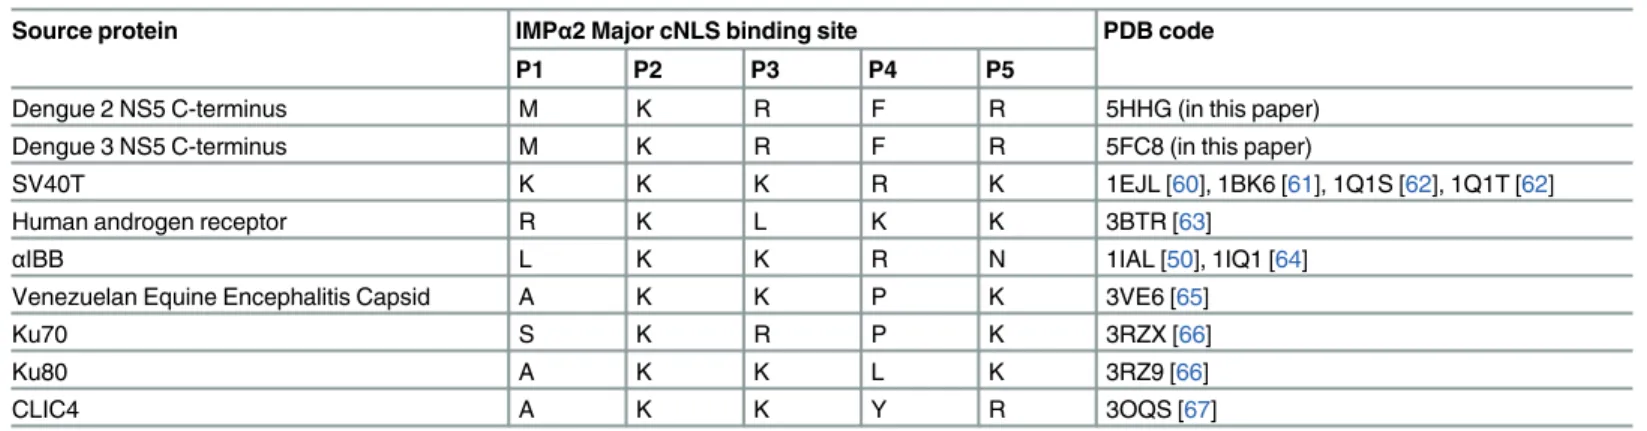 Table 3. Comparison of PDB deposited NLSs binding only the Imp α 2 major site.